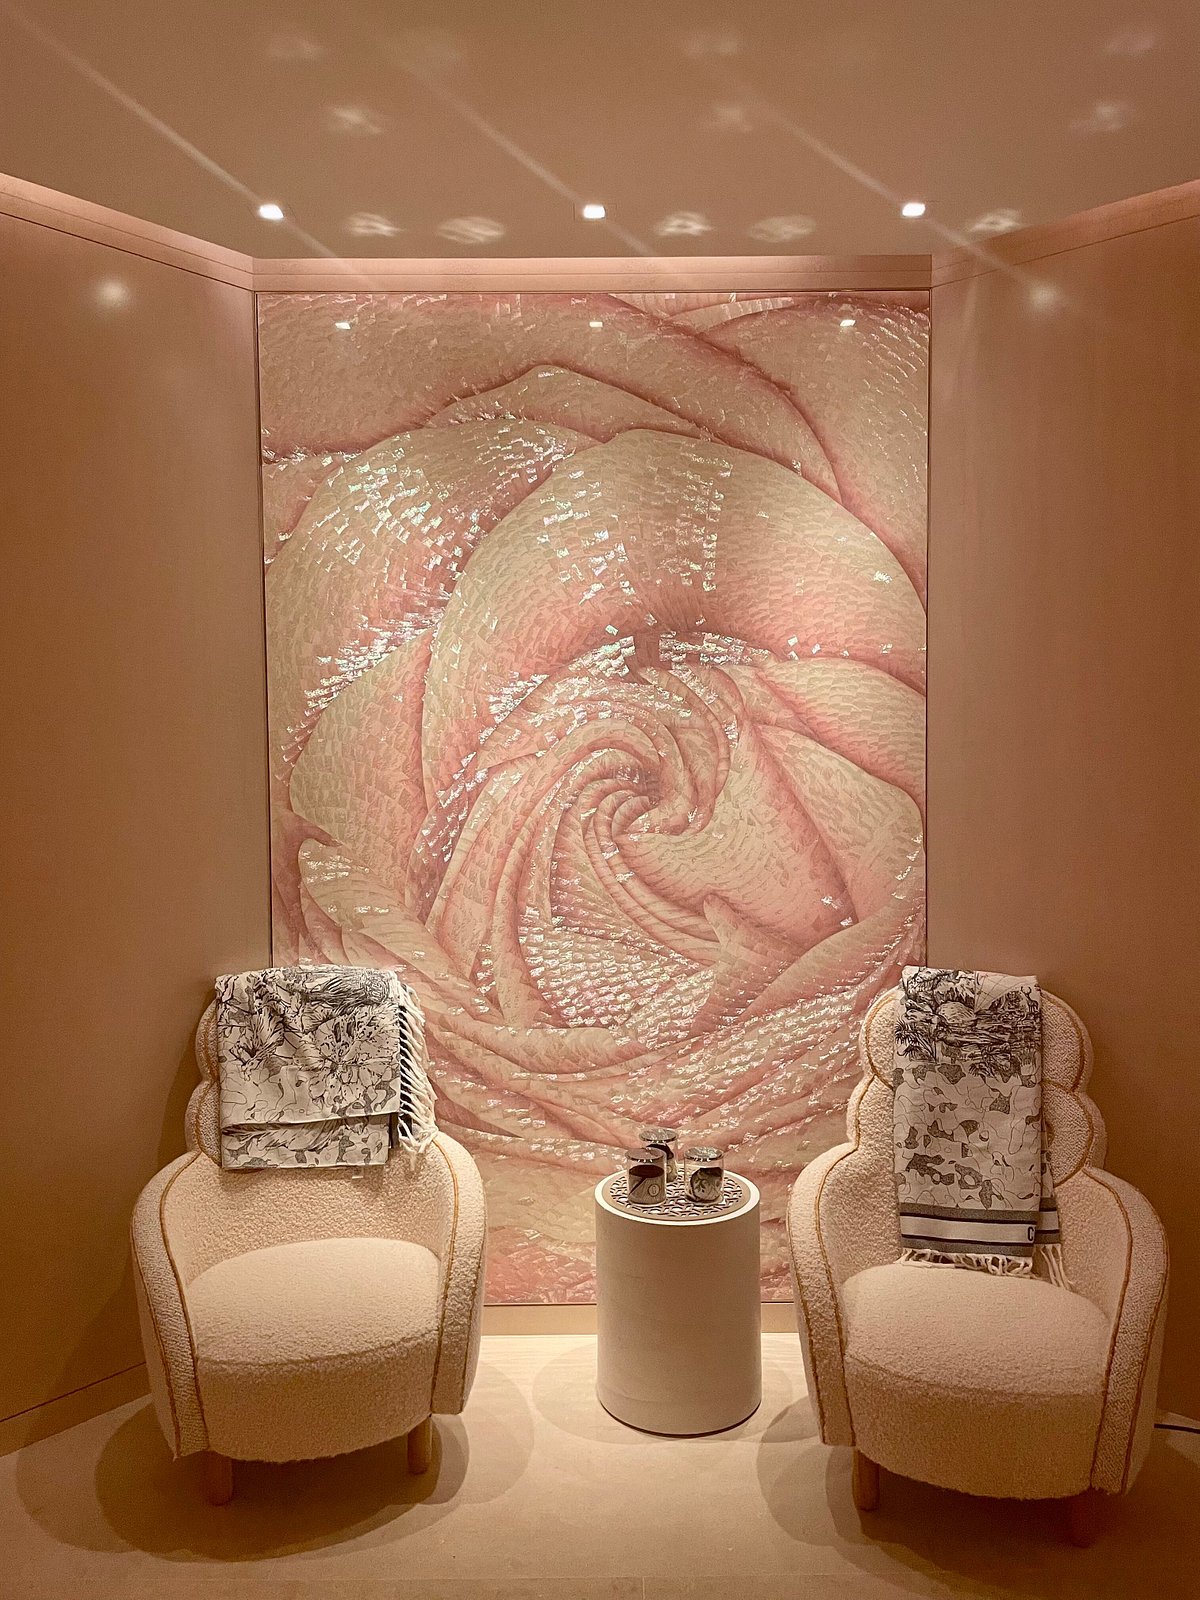 Dior Spa Cheval Blanc Paris - All You Need to Know BEFORE You Go